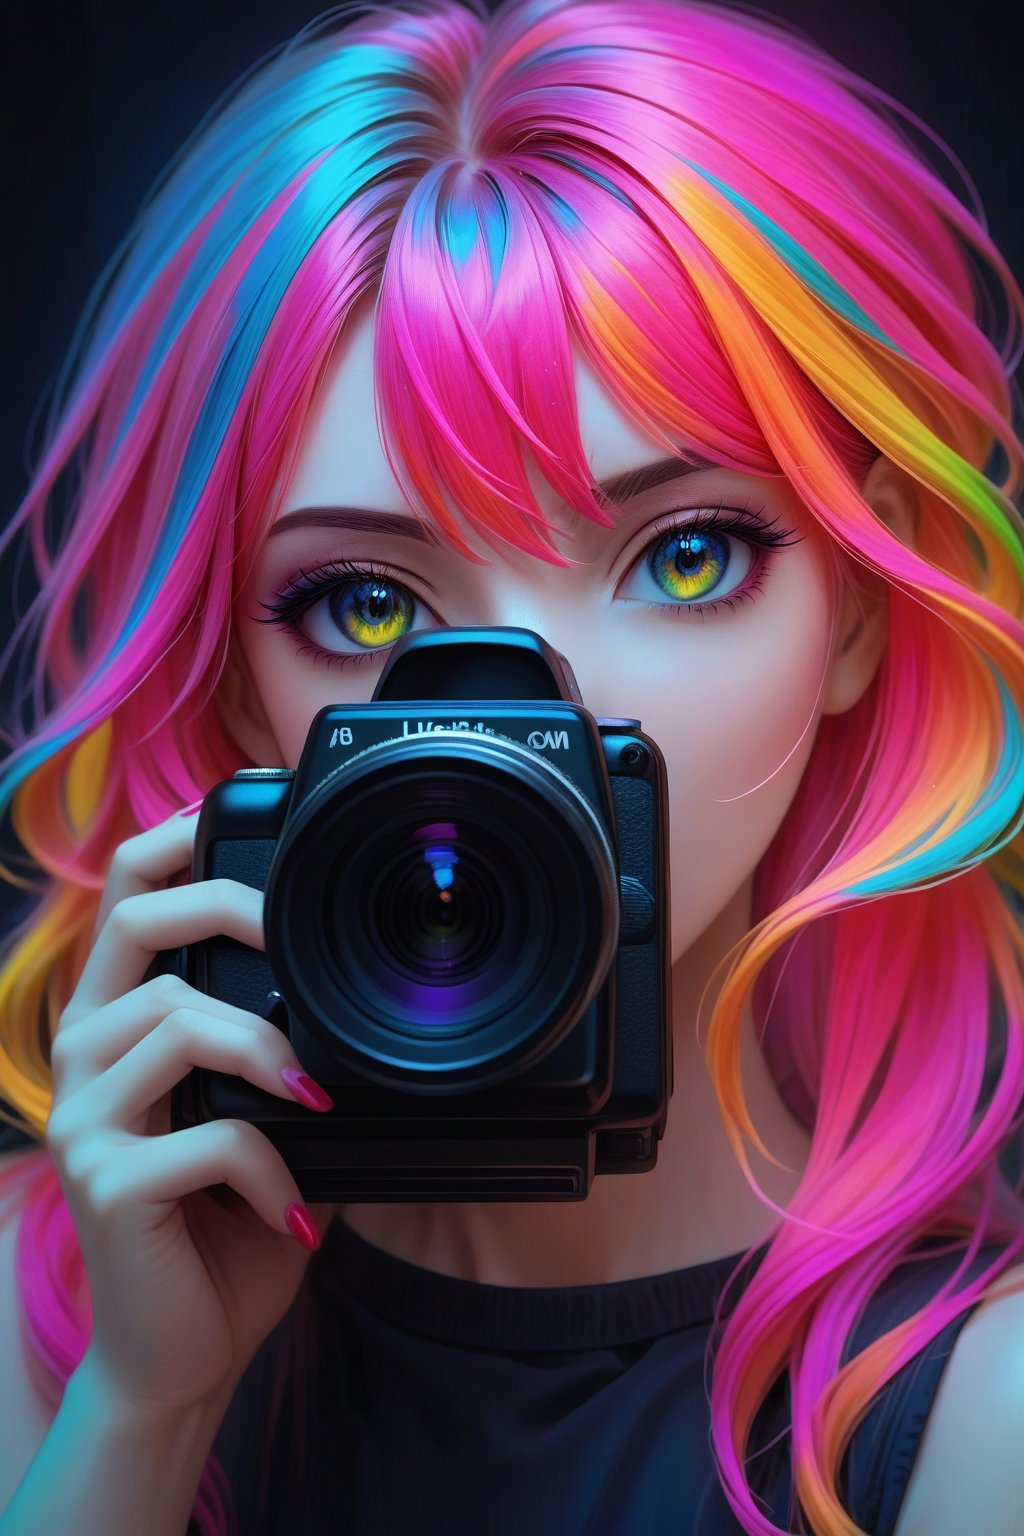 A mysteriously alluring photographer with vibrant, rainbow-colored hair holds a video camera, exuding a sense of depth and intrigue. The monochromatic color scheme only serves to emphasize the neon tones of the hair, adding a dynamic contrast to the scene. This digital painting expertly crafted with intricate digital brush strokes and vector graphics immerses viewers in a world where modern technology meets artistic expression. The portrait pops with neon hues, showcasing the photographer's creativity and passion in a visually captivating way.